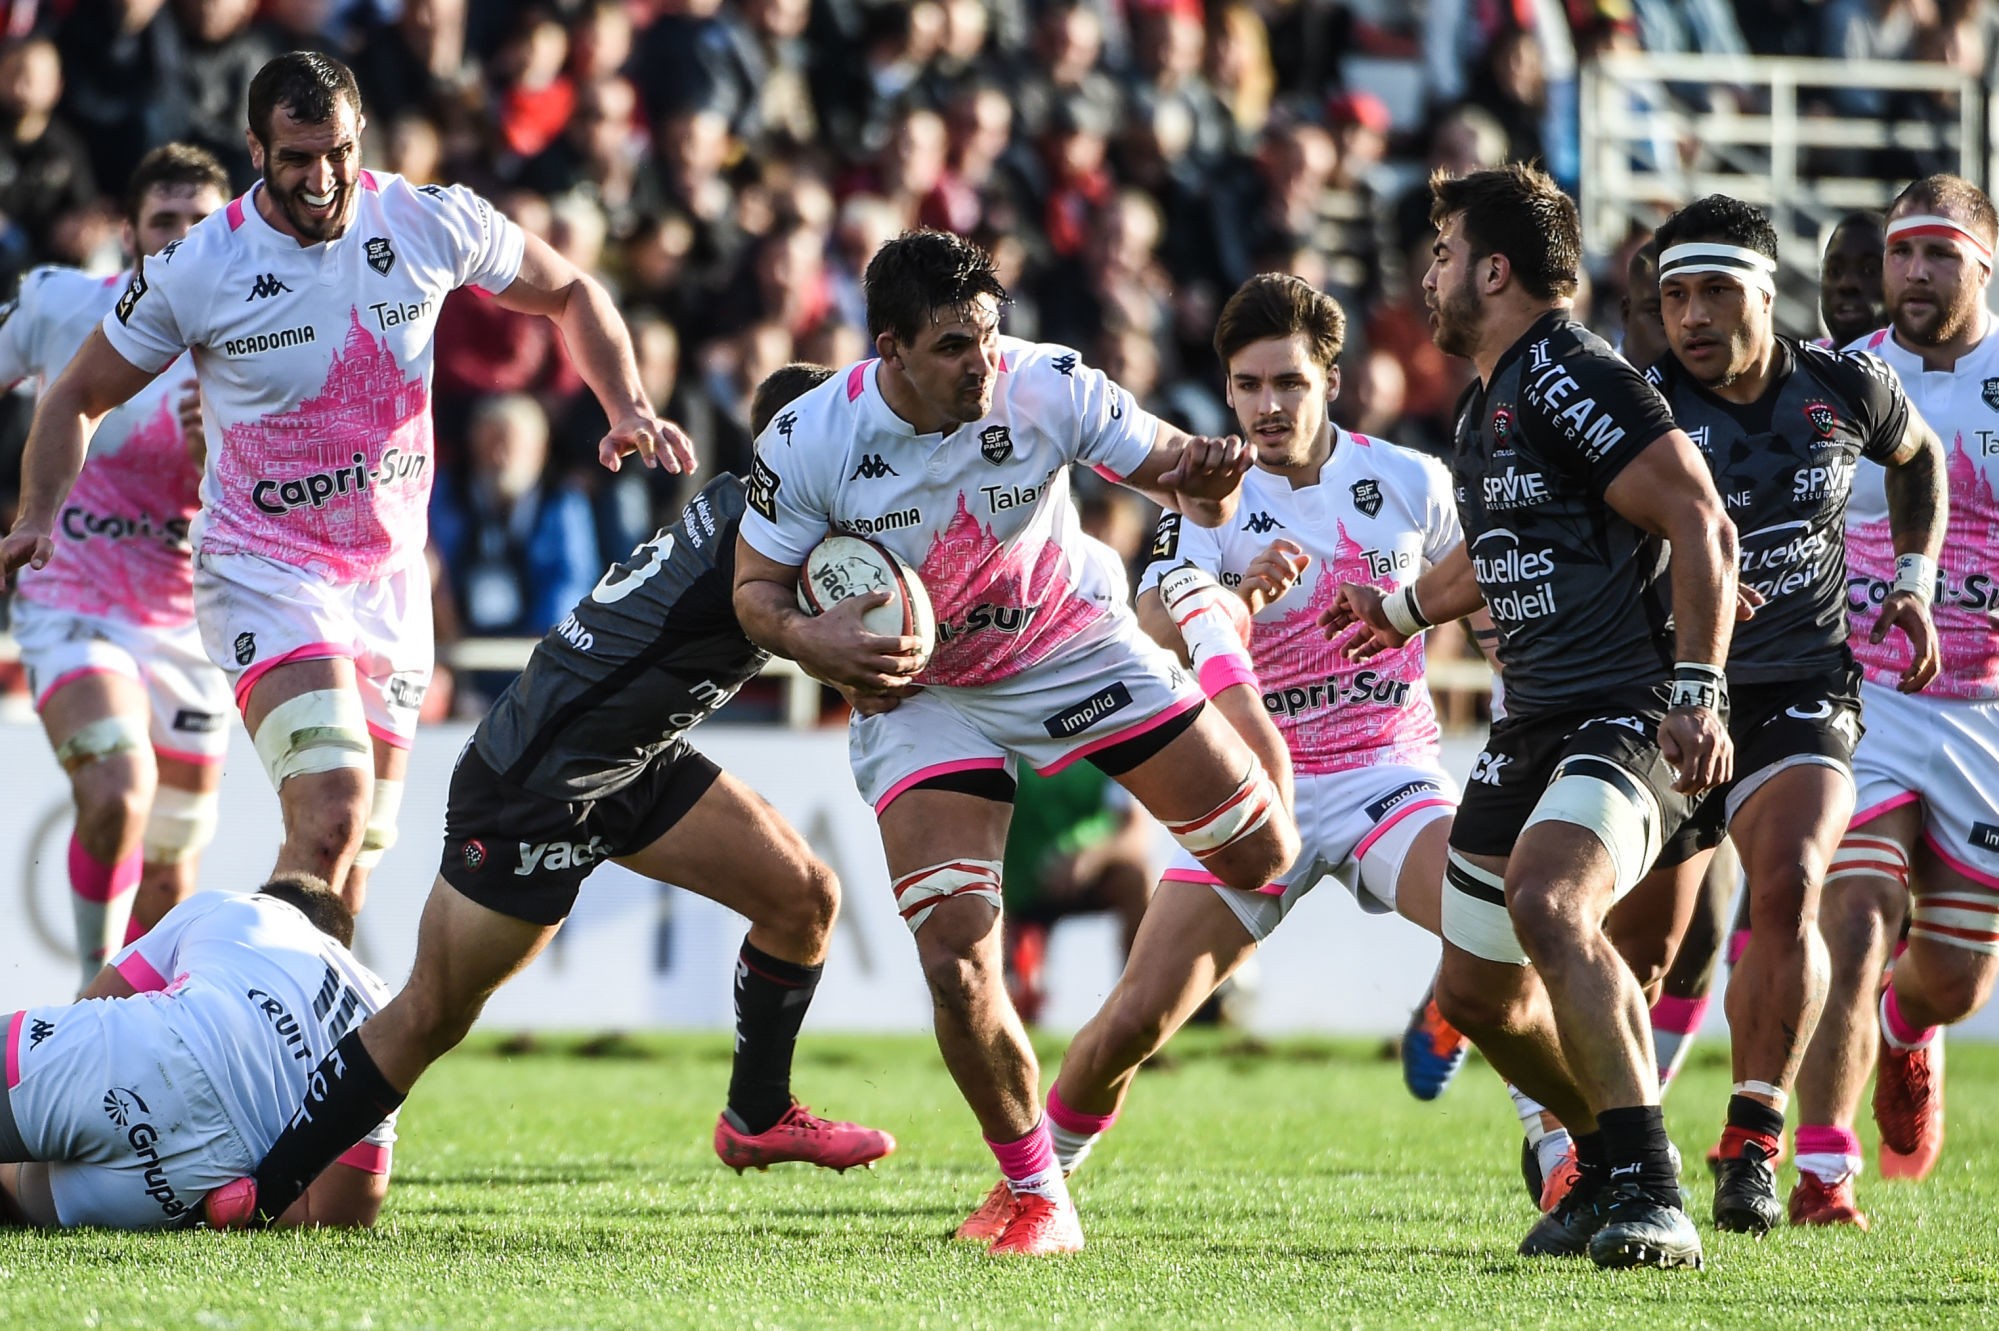 Pablo MATERA of Stade Francais during the Top 14 match between RC Toulon and Stade Francais Paris on March 1, 2020 in Toulon, France. (Photo by Alexandre Dimou/Icon Sport) - Pablo MATERA - Stade Felix Mayol - Toulon (France)